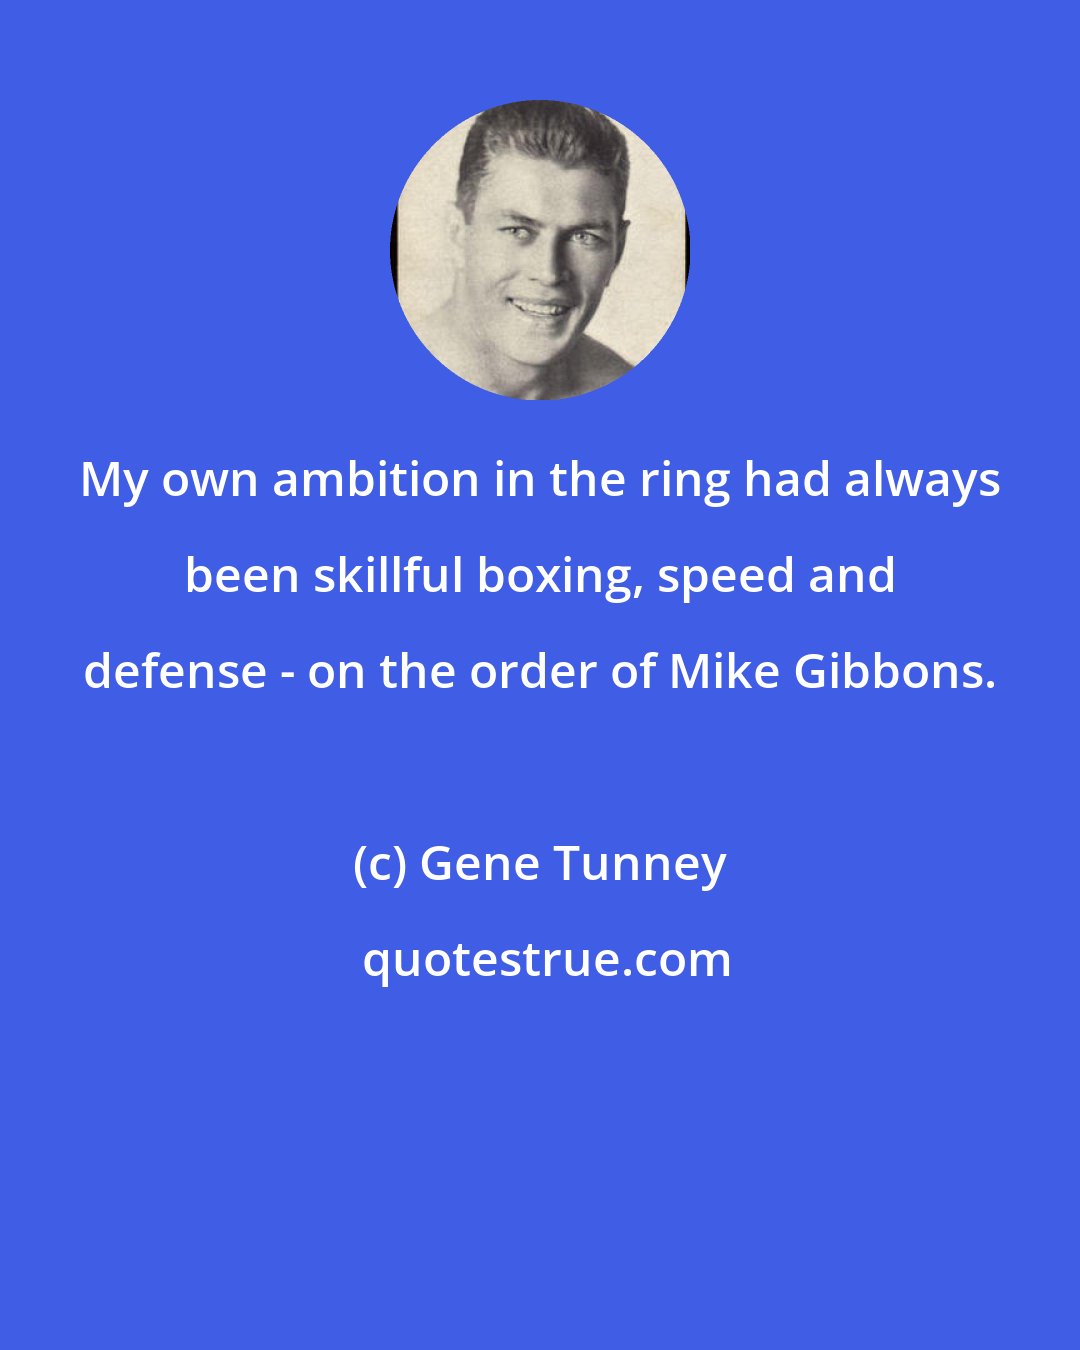 Gene Tunney: My own ambition in the ring had always been skillful boxing, speed and defense - on the order of Mike Gibbons.